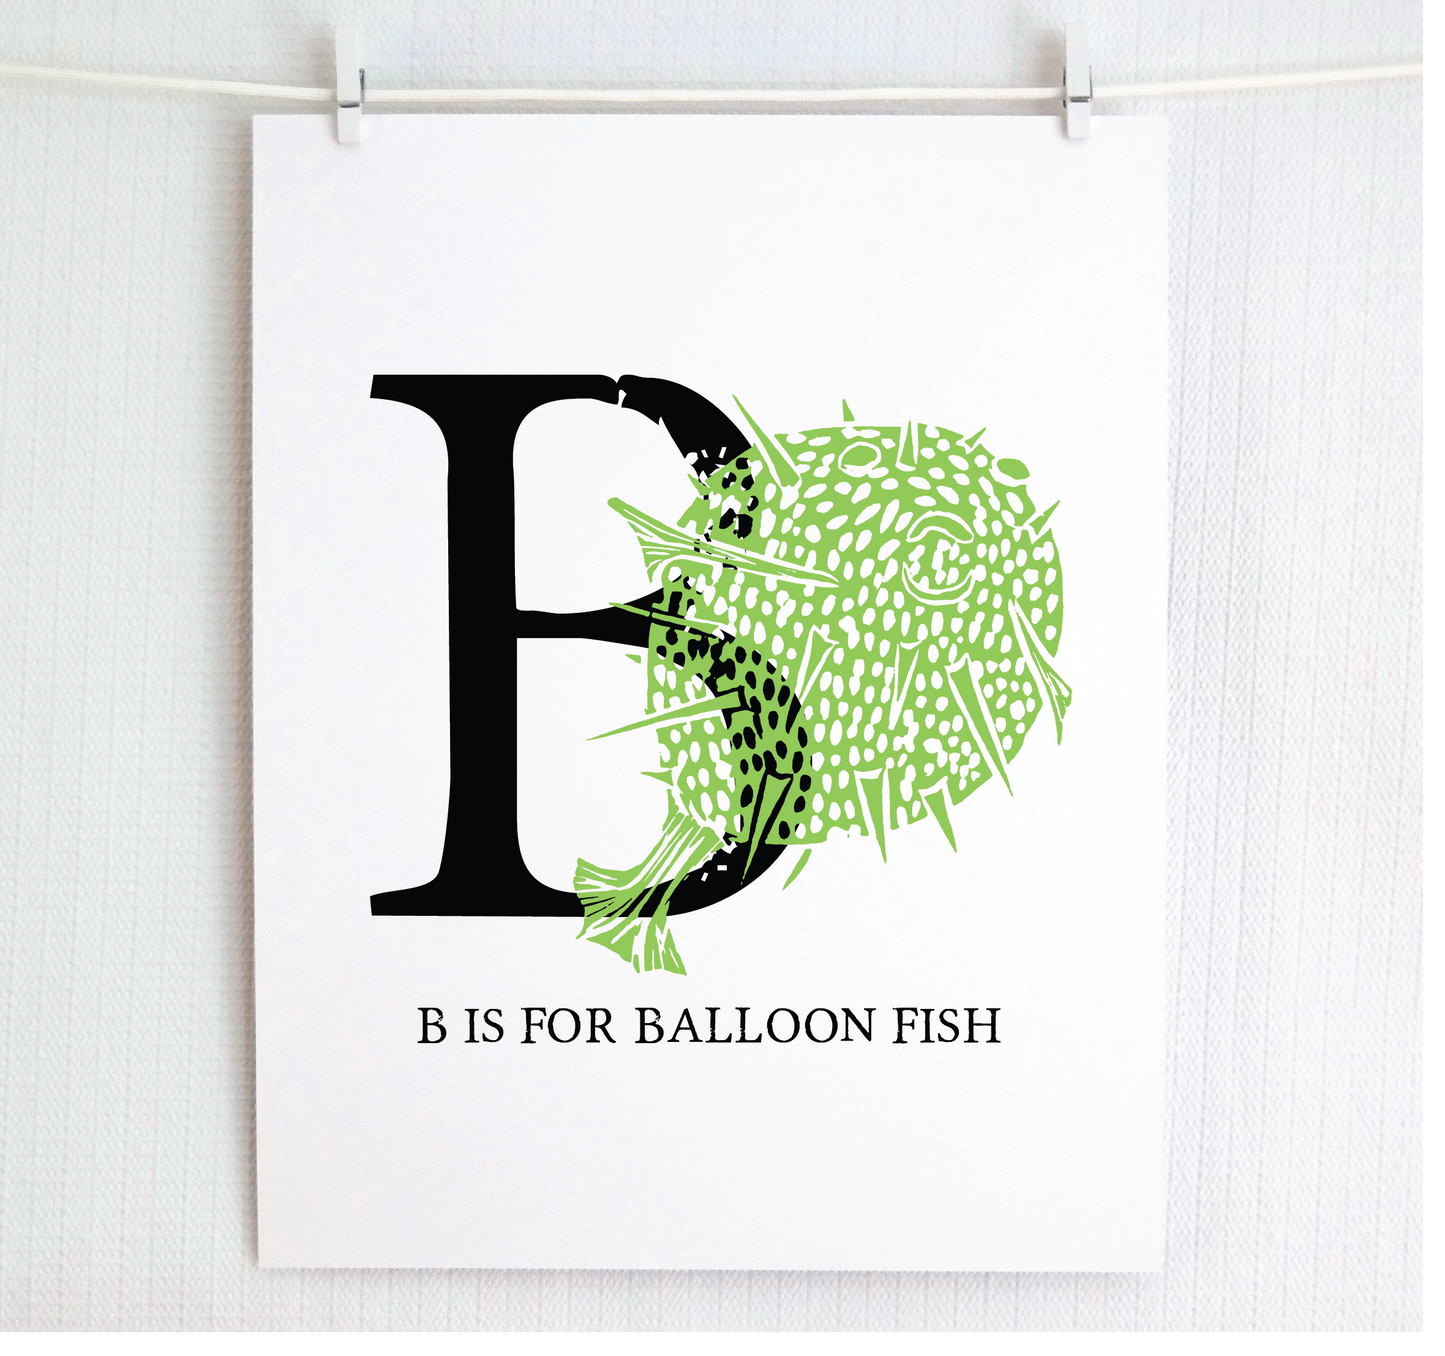 B is for Balloon Fish